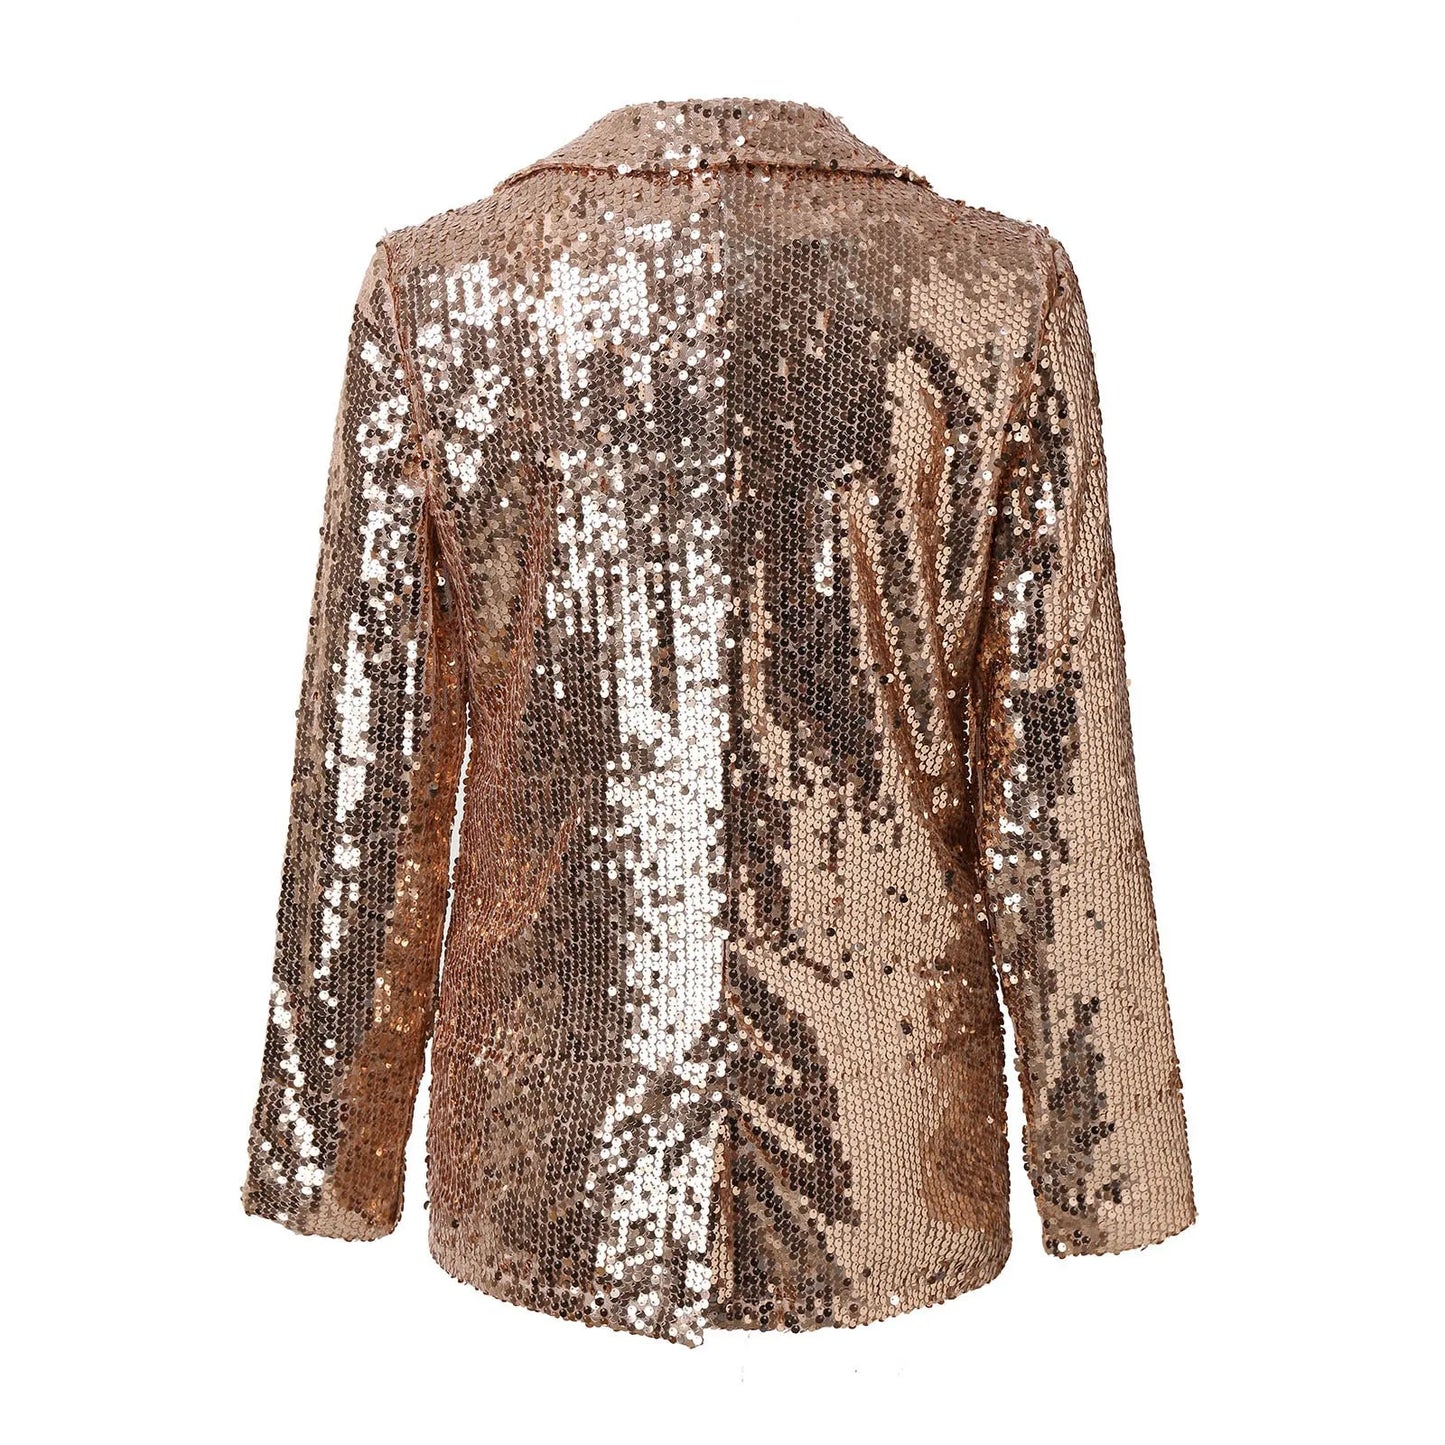 Autumn Basic Jacket Women Sequin Coats Outfits Casual Ladies Outerwear